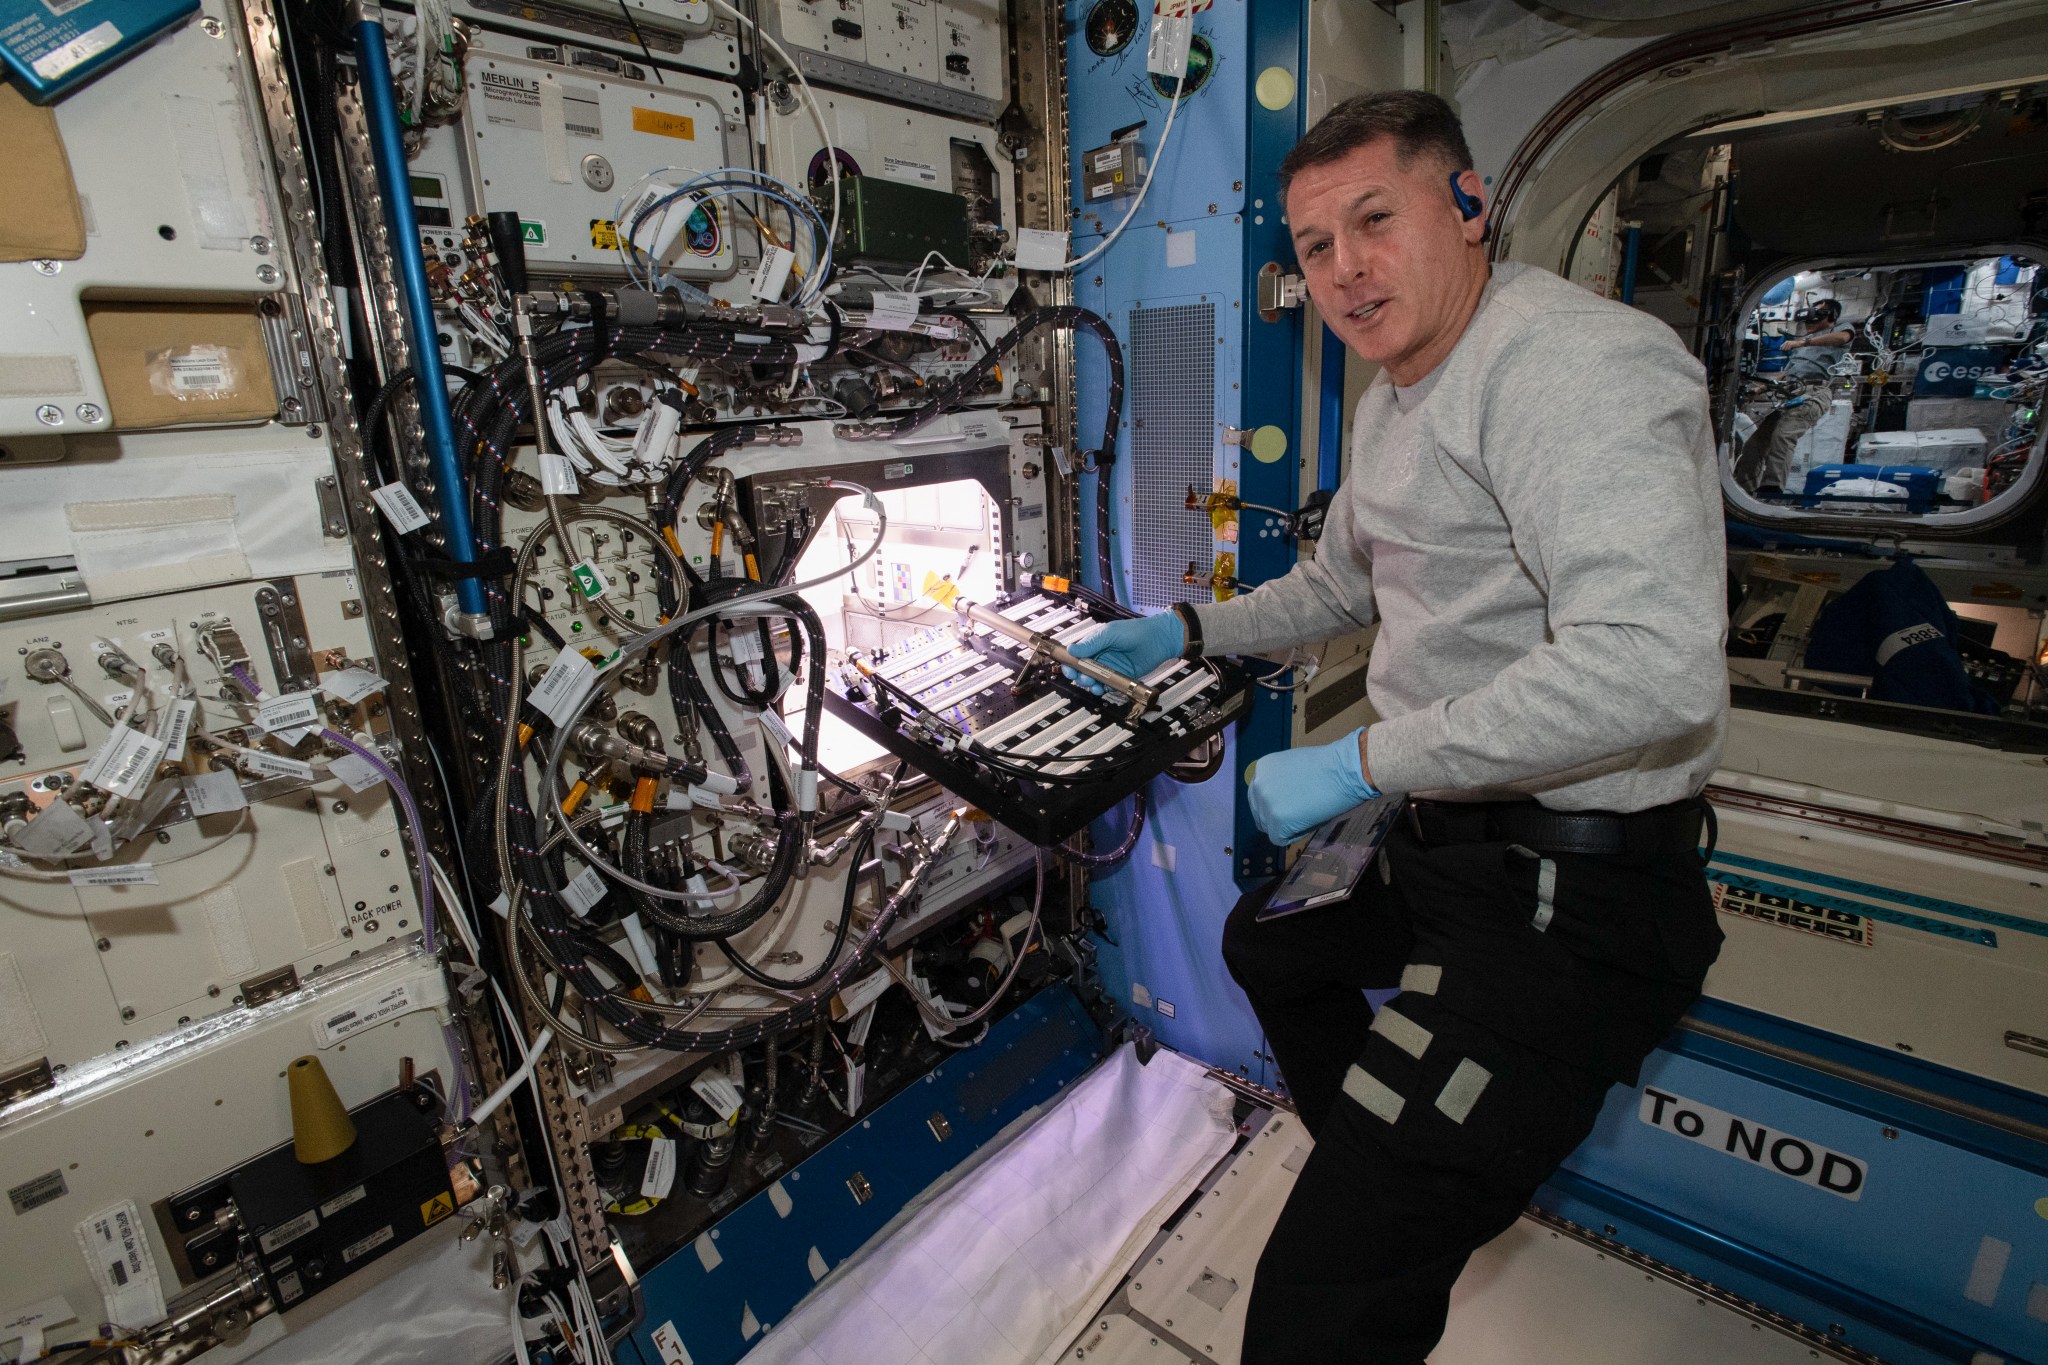 NASA astronaut Shane Kimbrough inserts a device called a science carrier into the Advanced Plant Habitat (APH), on July 12, 2021 as part of the Plant Habitat-04 experiment. 